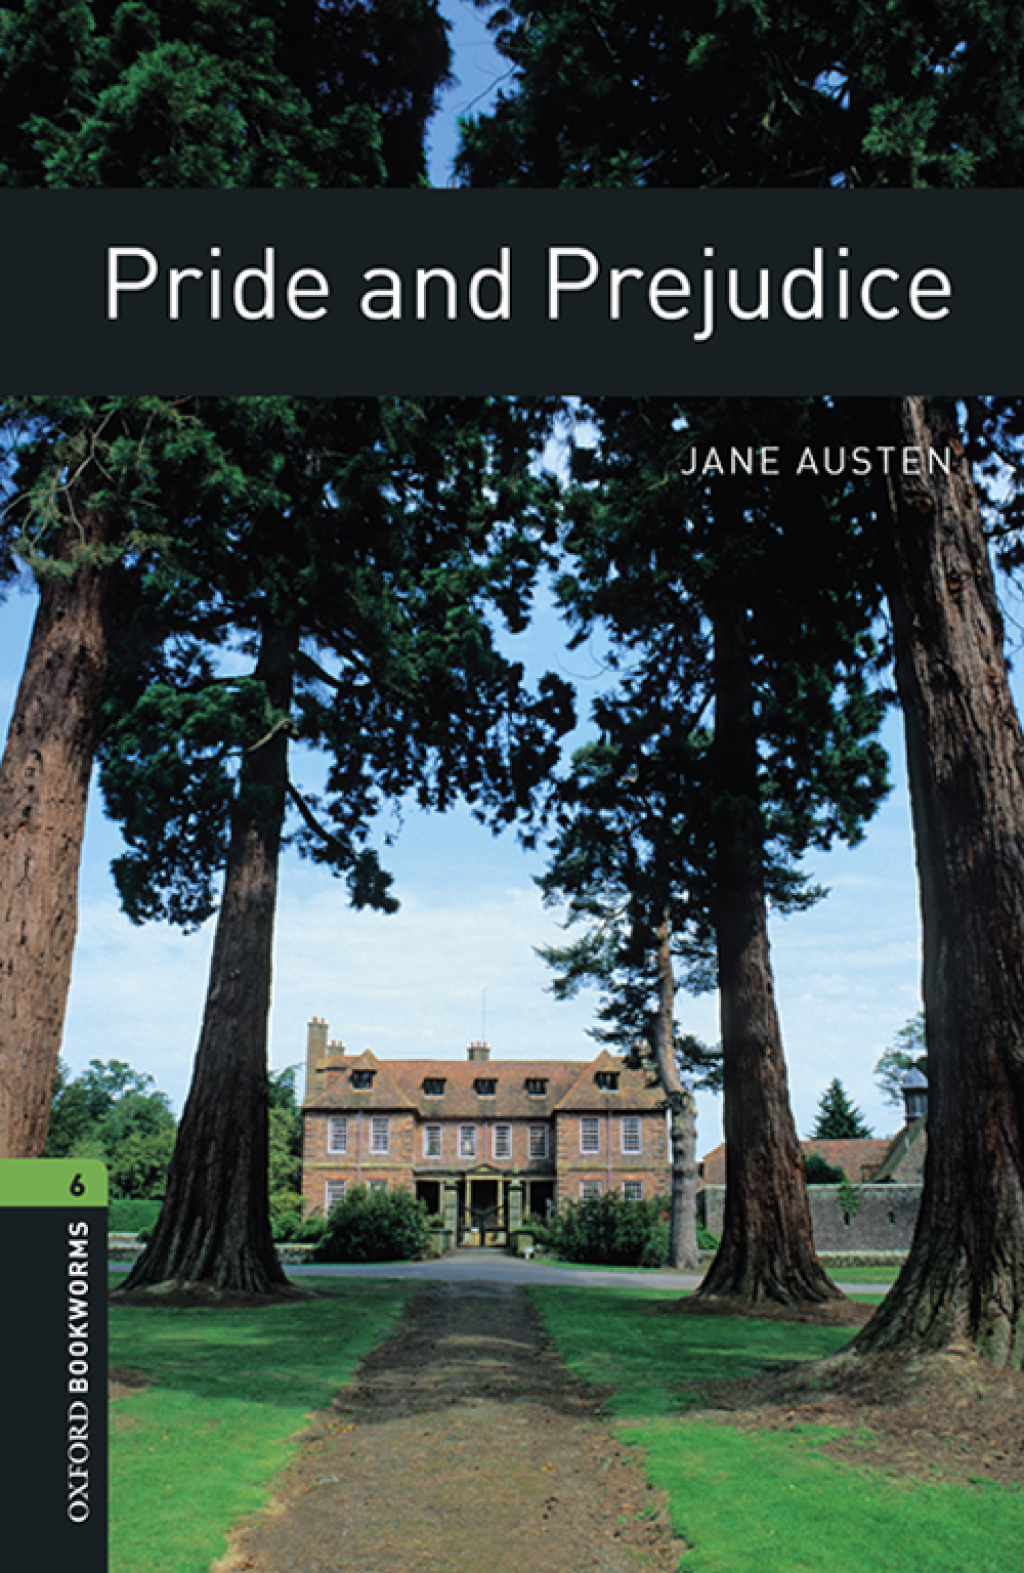 Pride and Prejudice Level 6 Oxford Bookworms Library - 3rd Edition (eBook Rental)